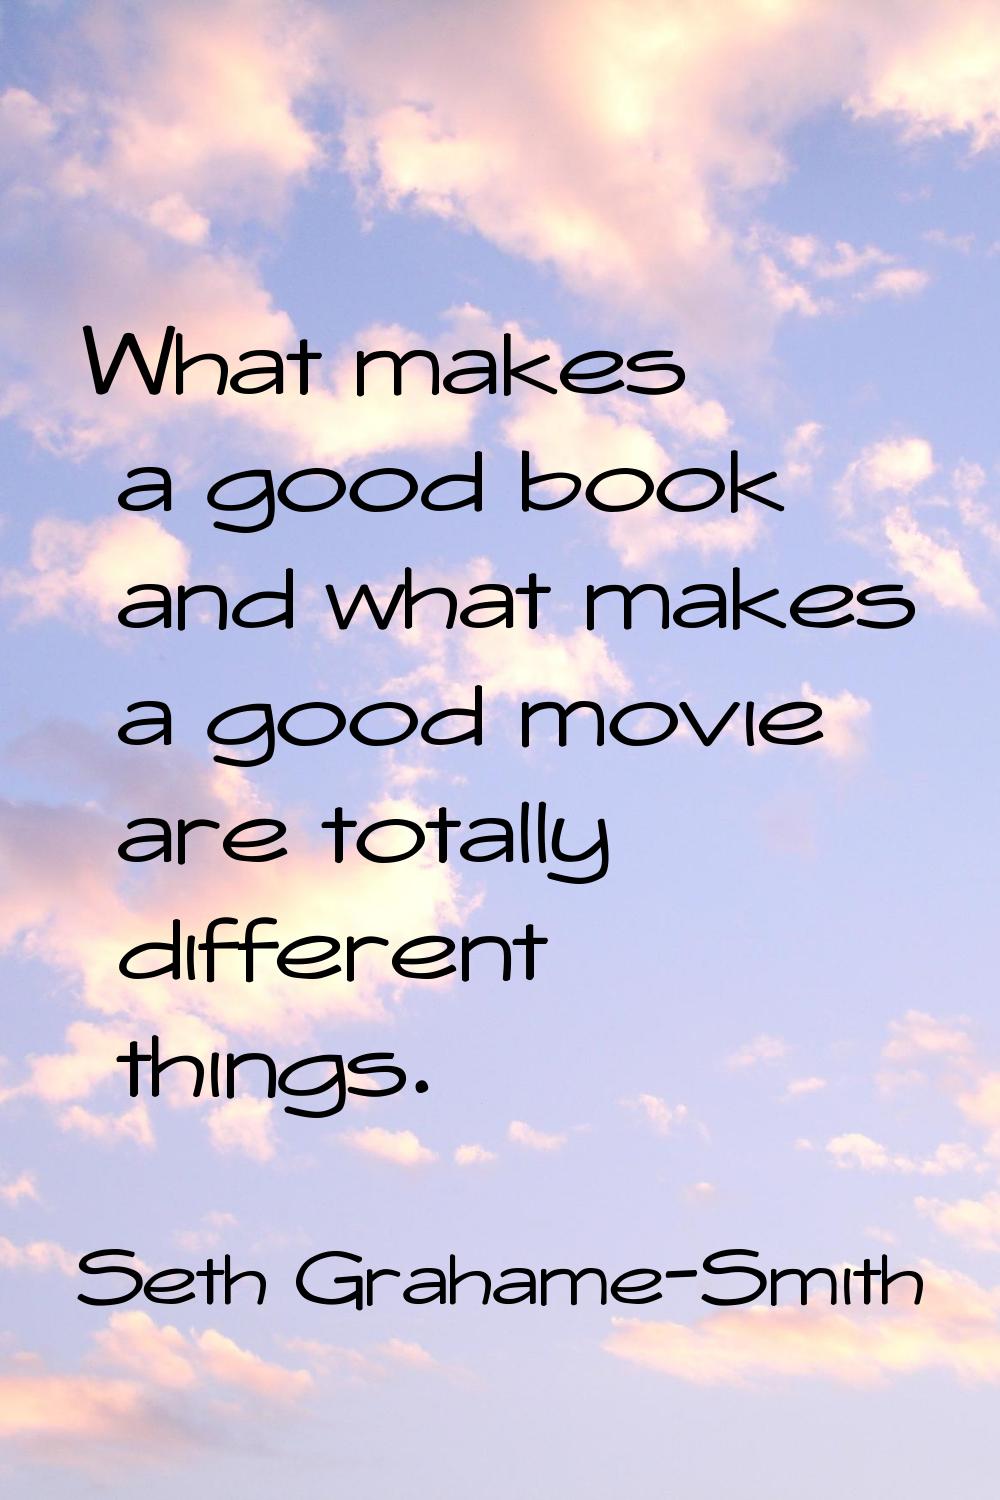 What makes a good book and what makes a good movie are totally different things.